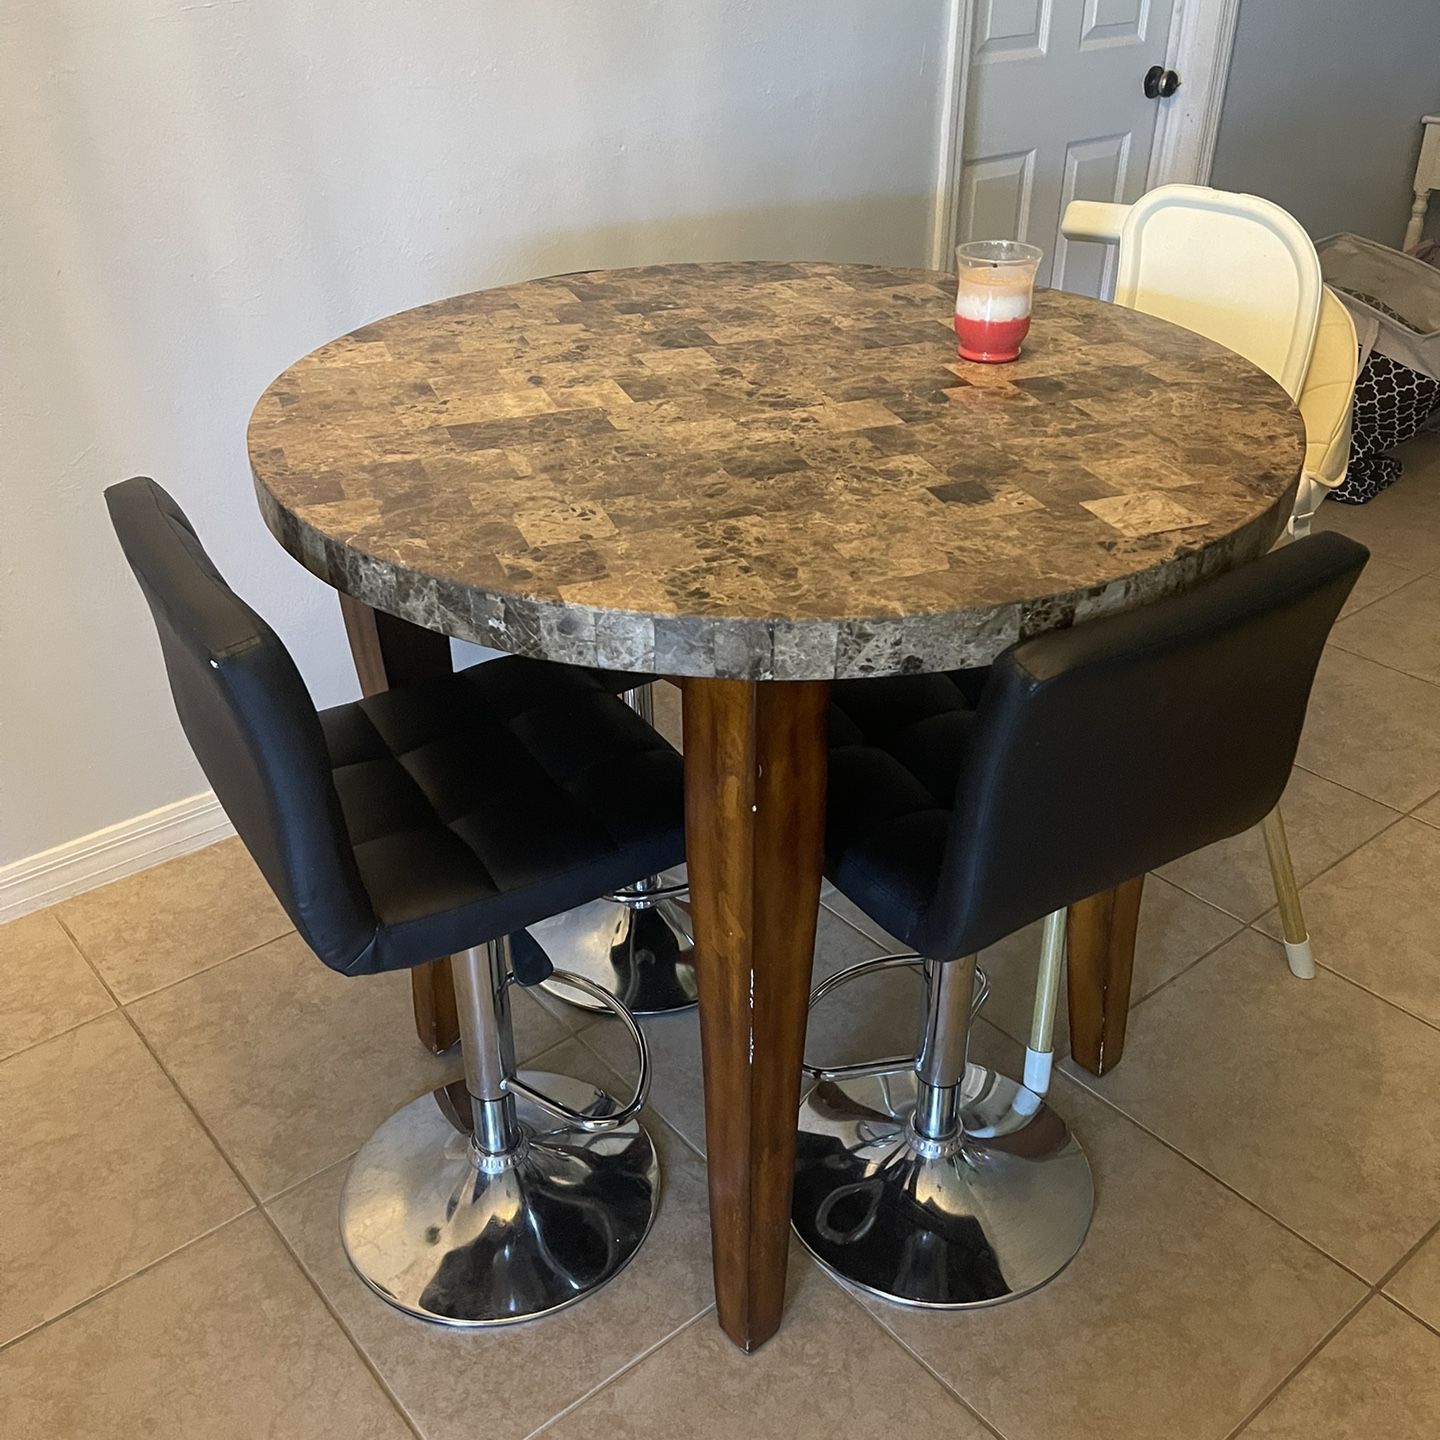 Granite Heavy Table Comes With 2 Leather Chairs